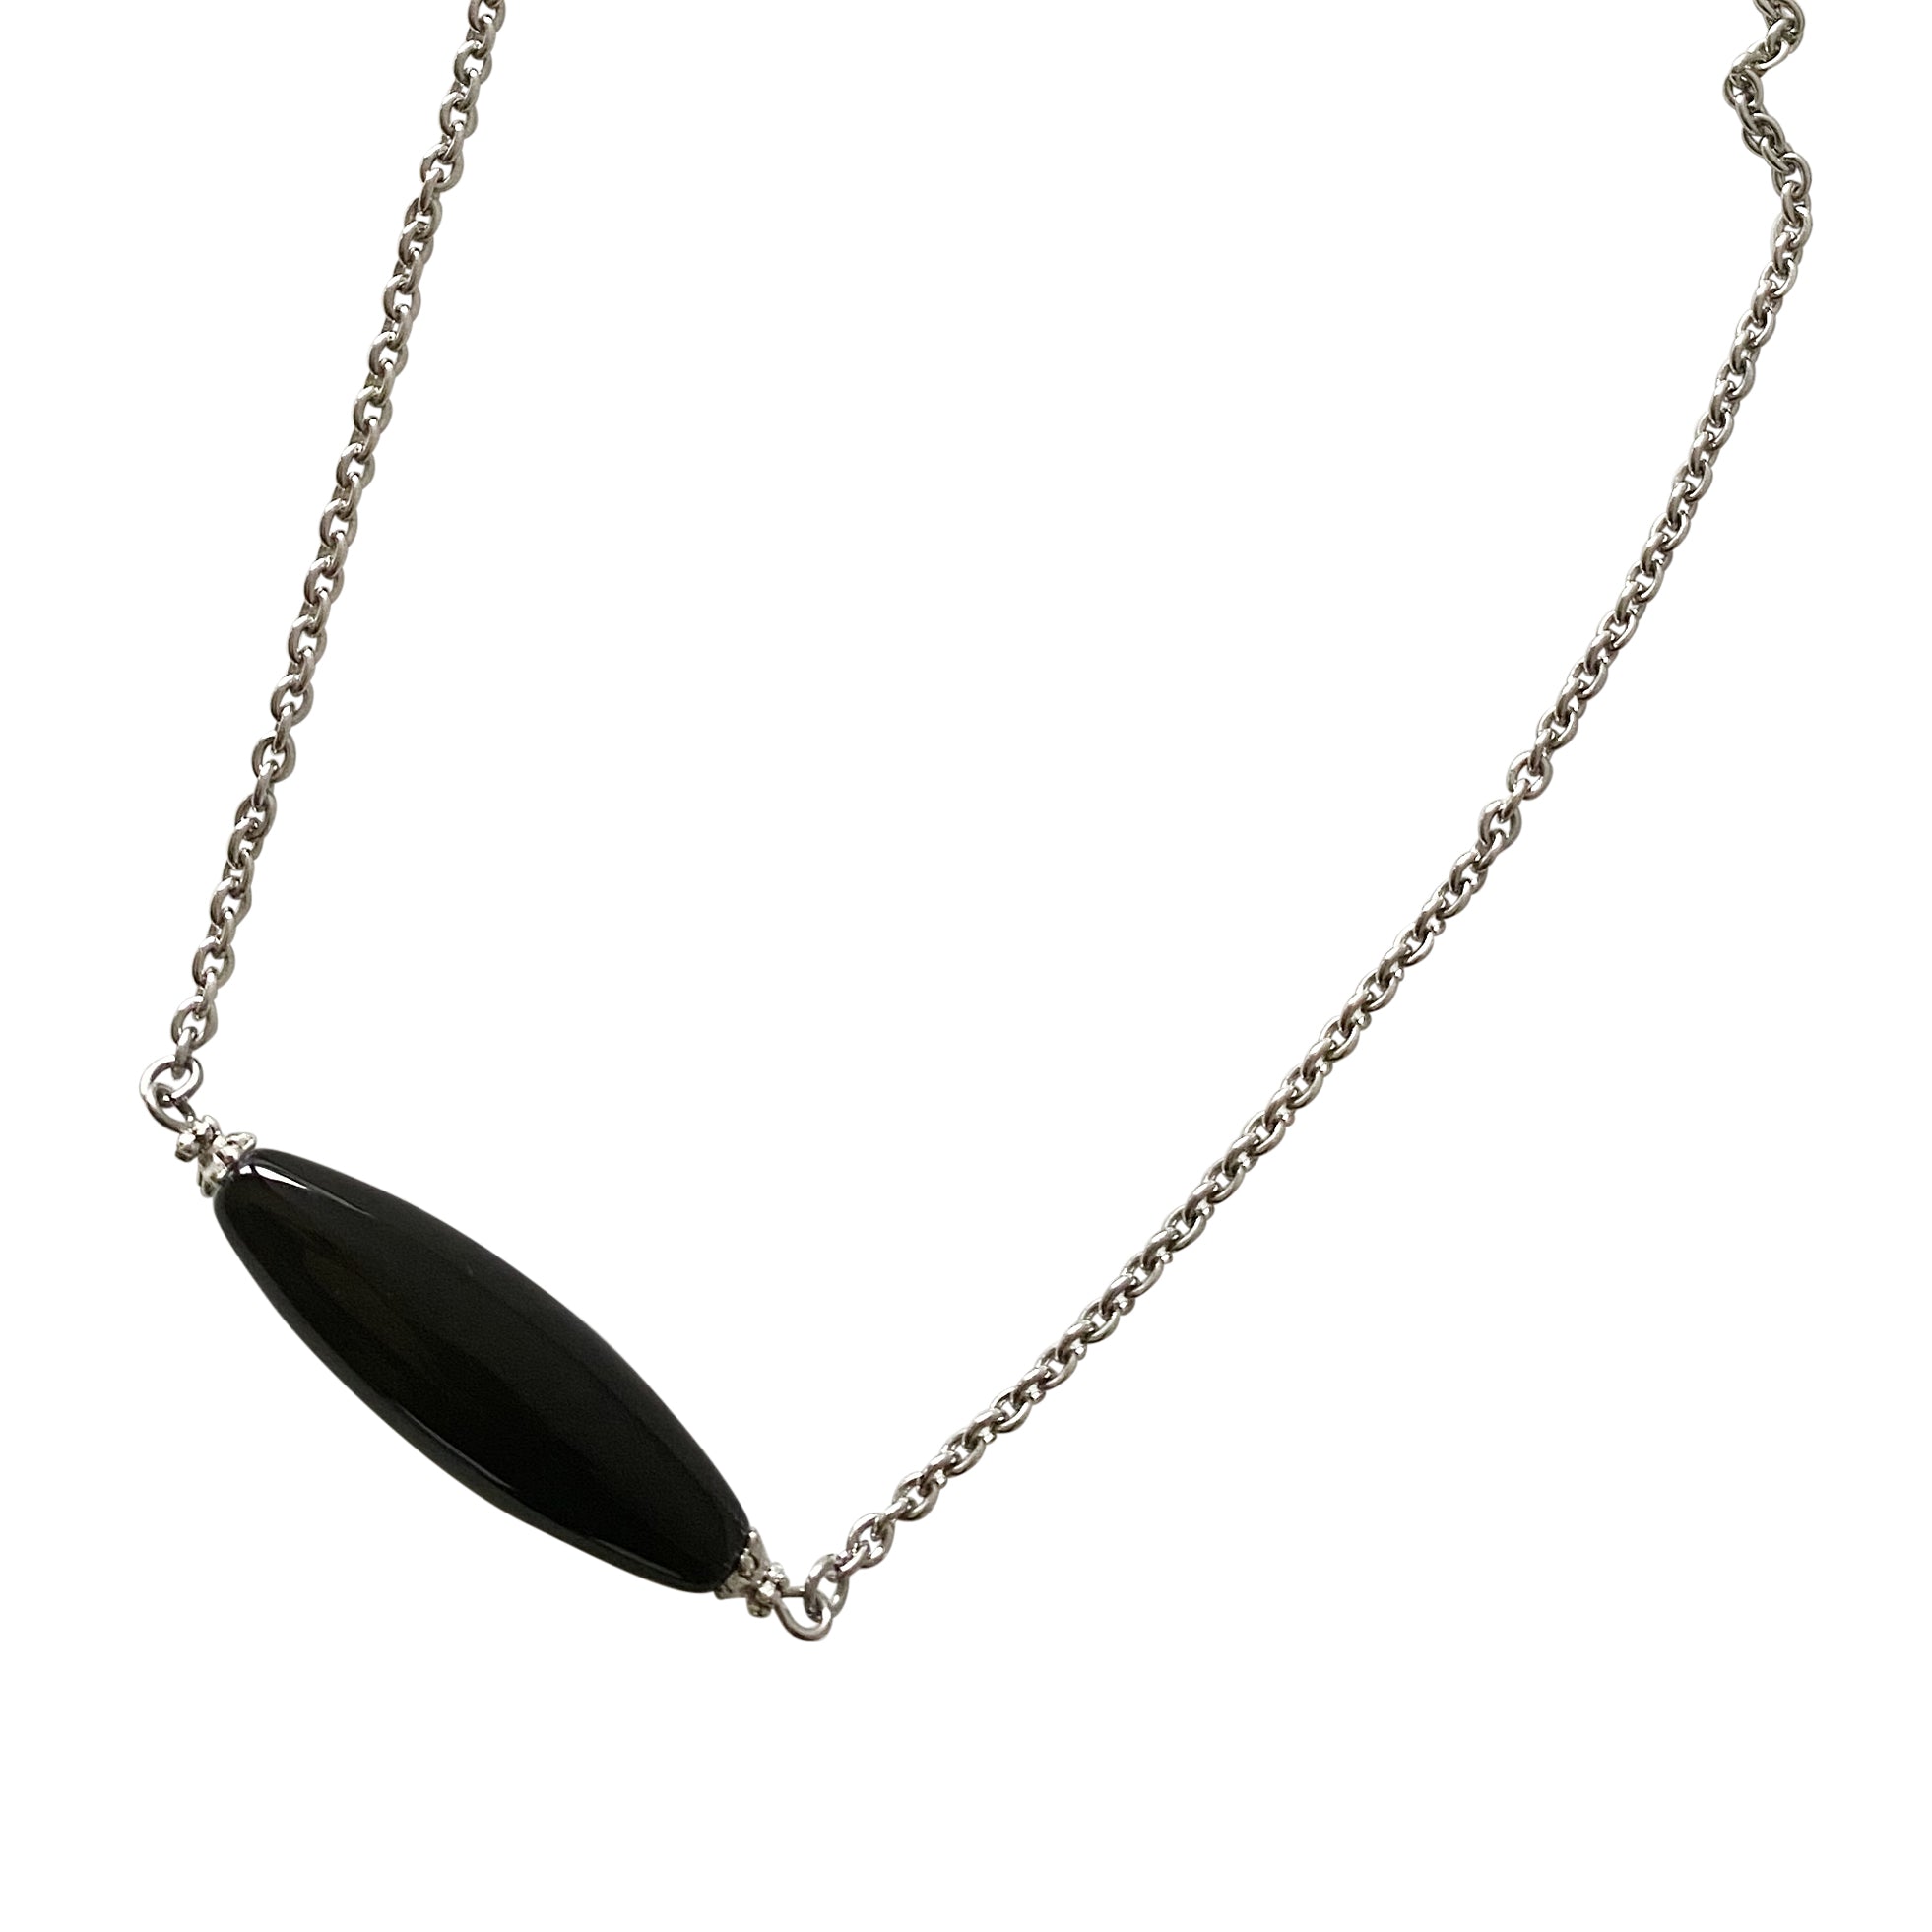 Black Onyx Bar Necklace with Stainless Steel Chain